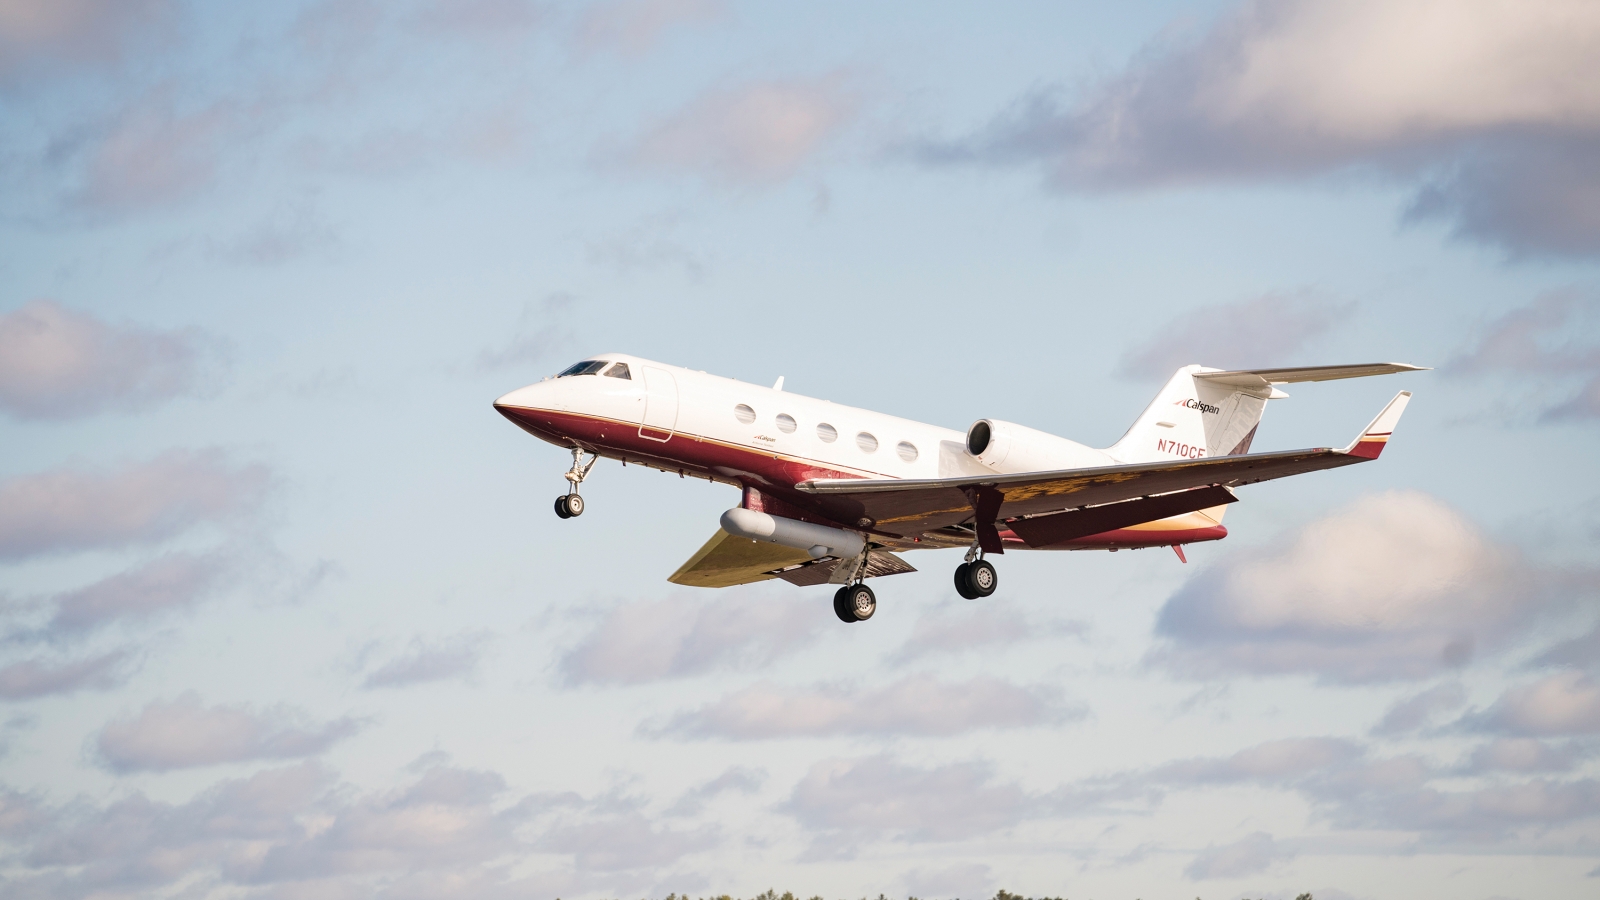 A Gulfstream III aircraft is shown with a PACECR communications pod attached.